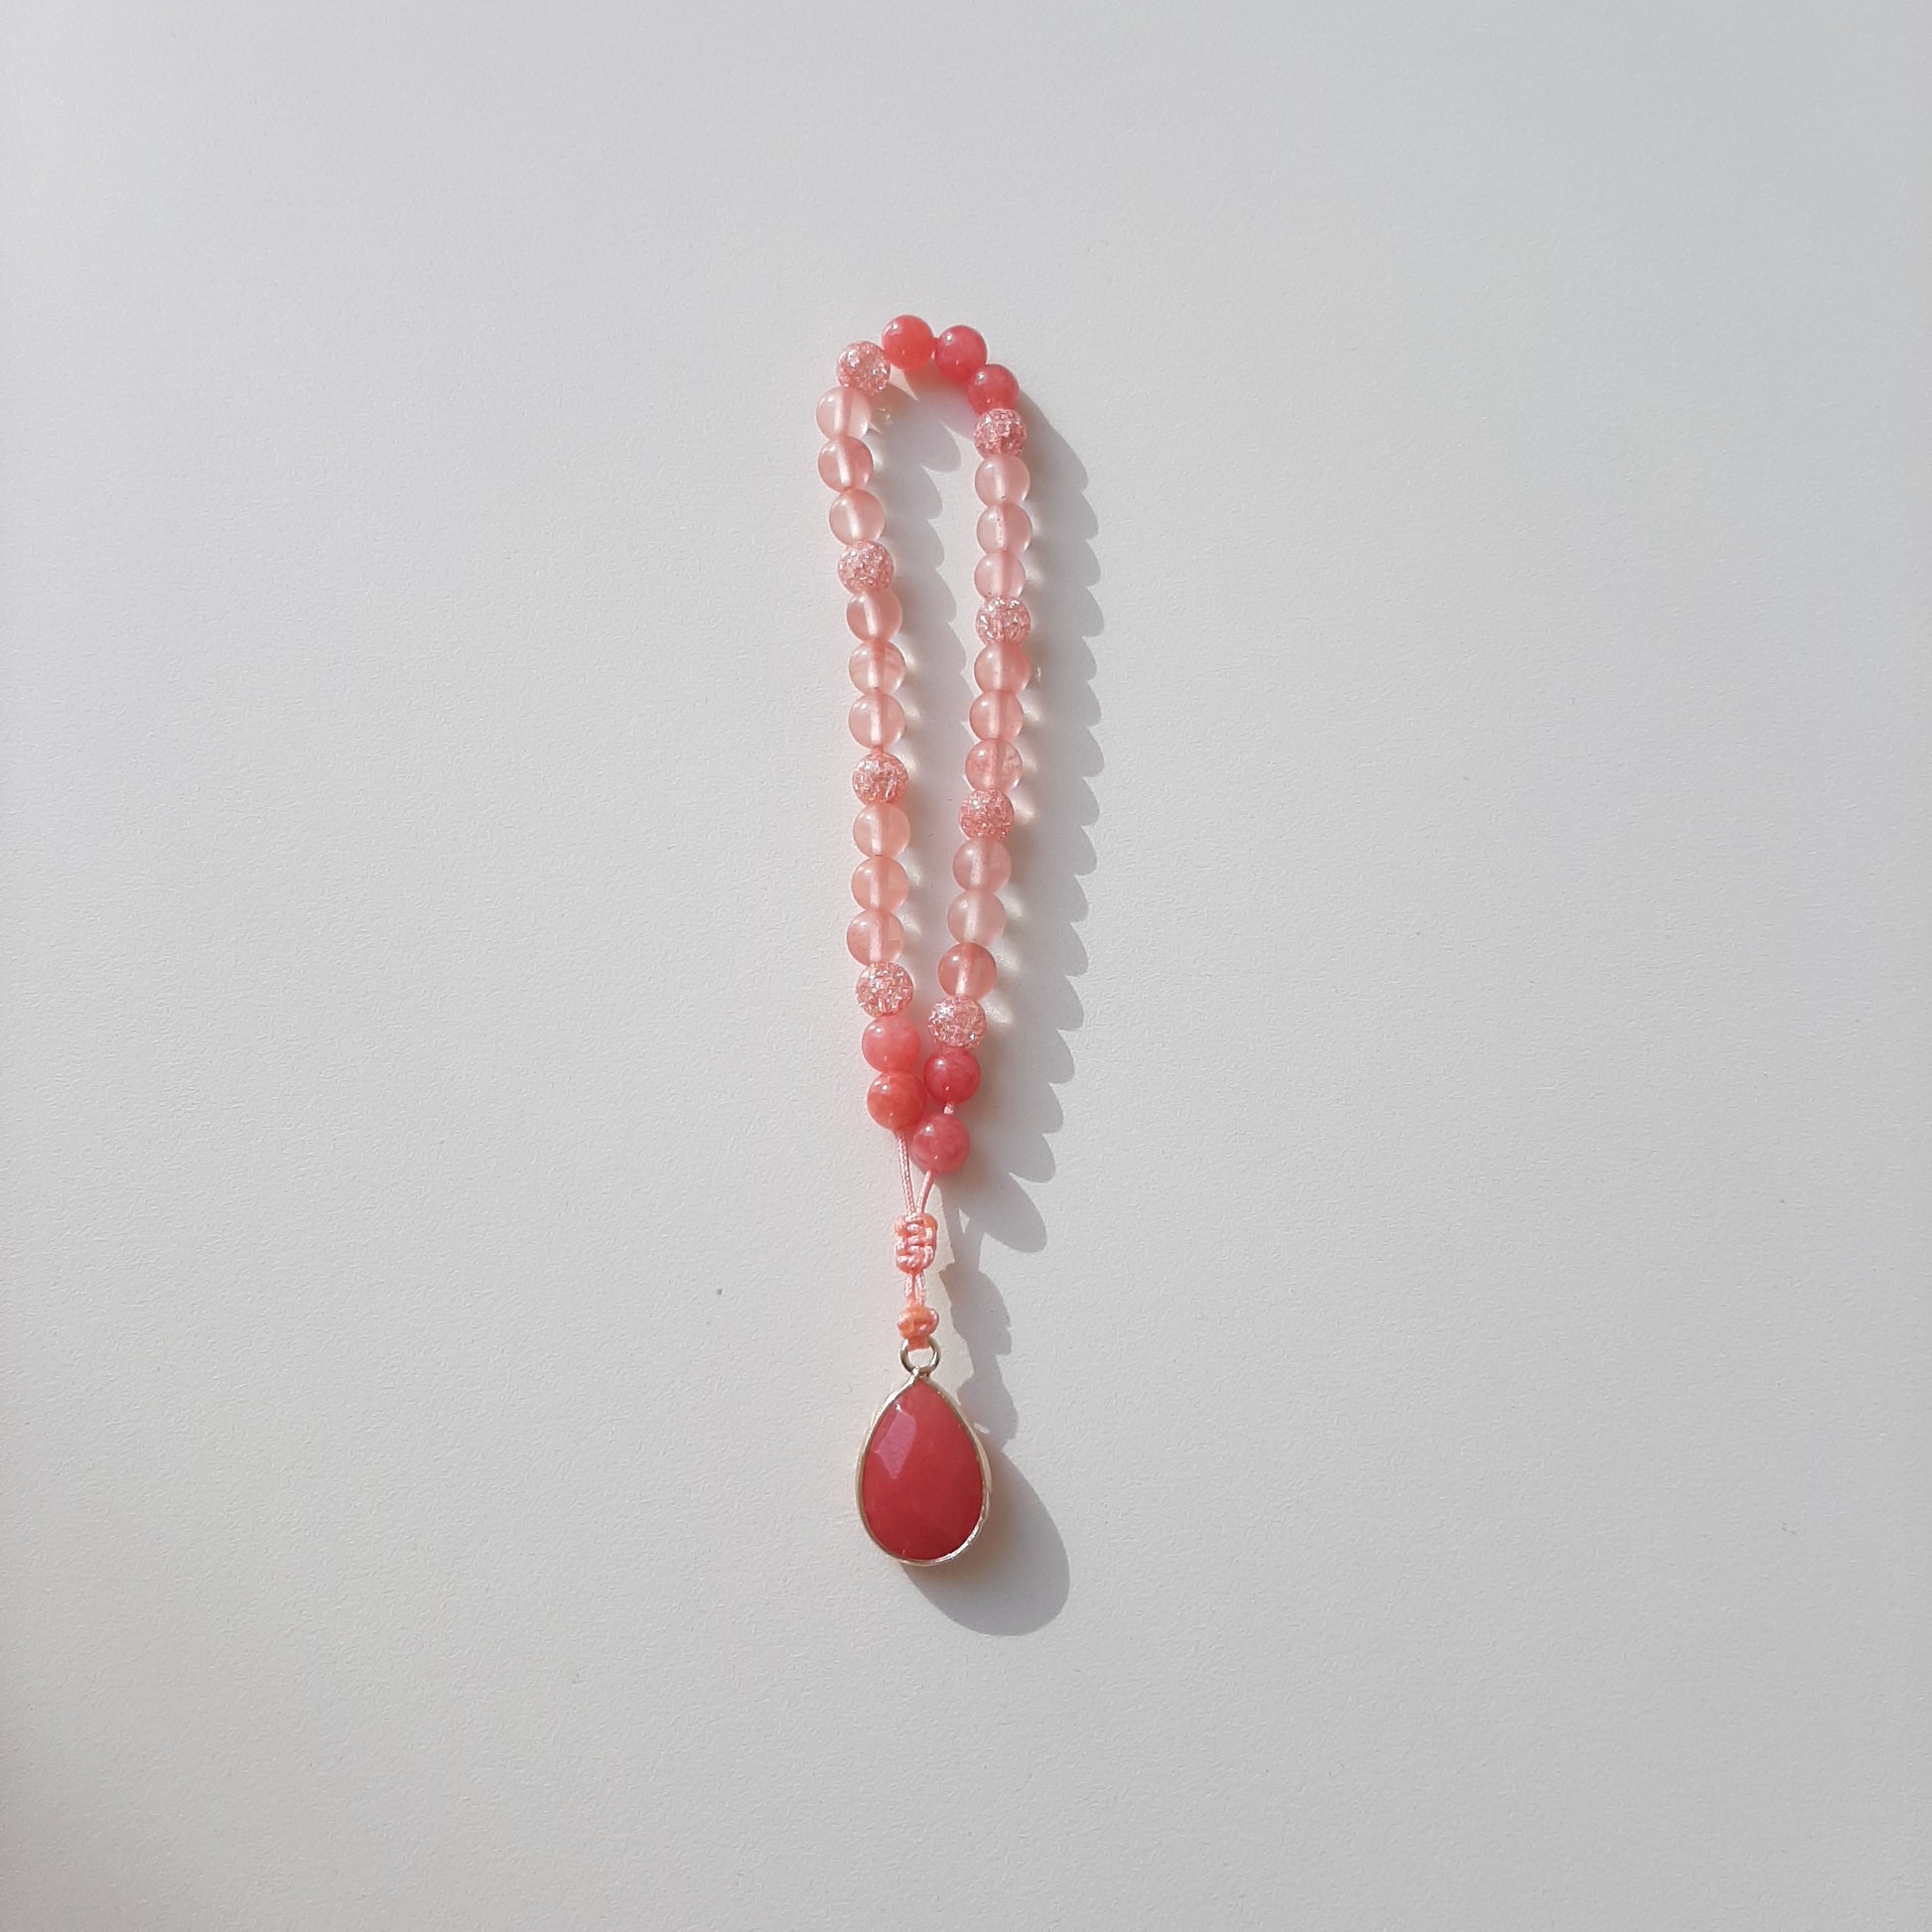 Watermelon quartz and coral beads, with a watermelon quartz pendant.  Features an adjustable knot.  33 beads (6mm beads)